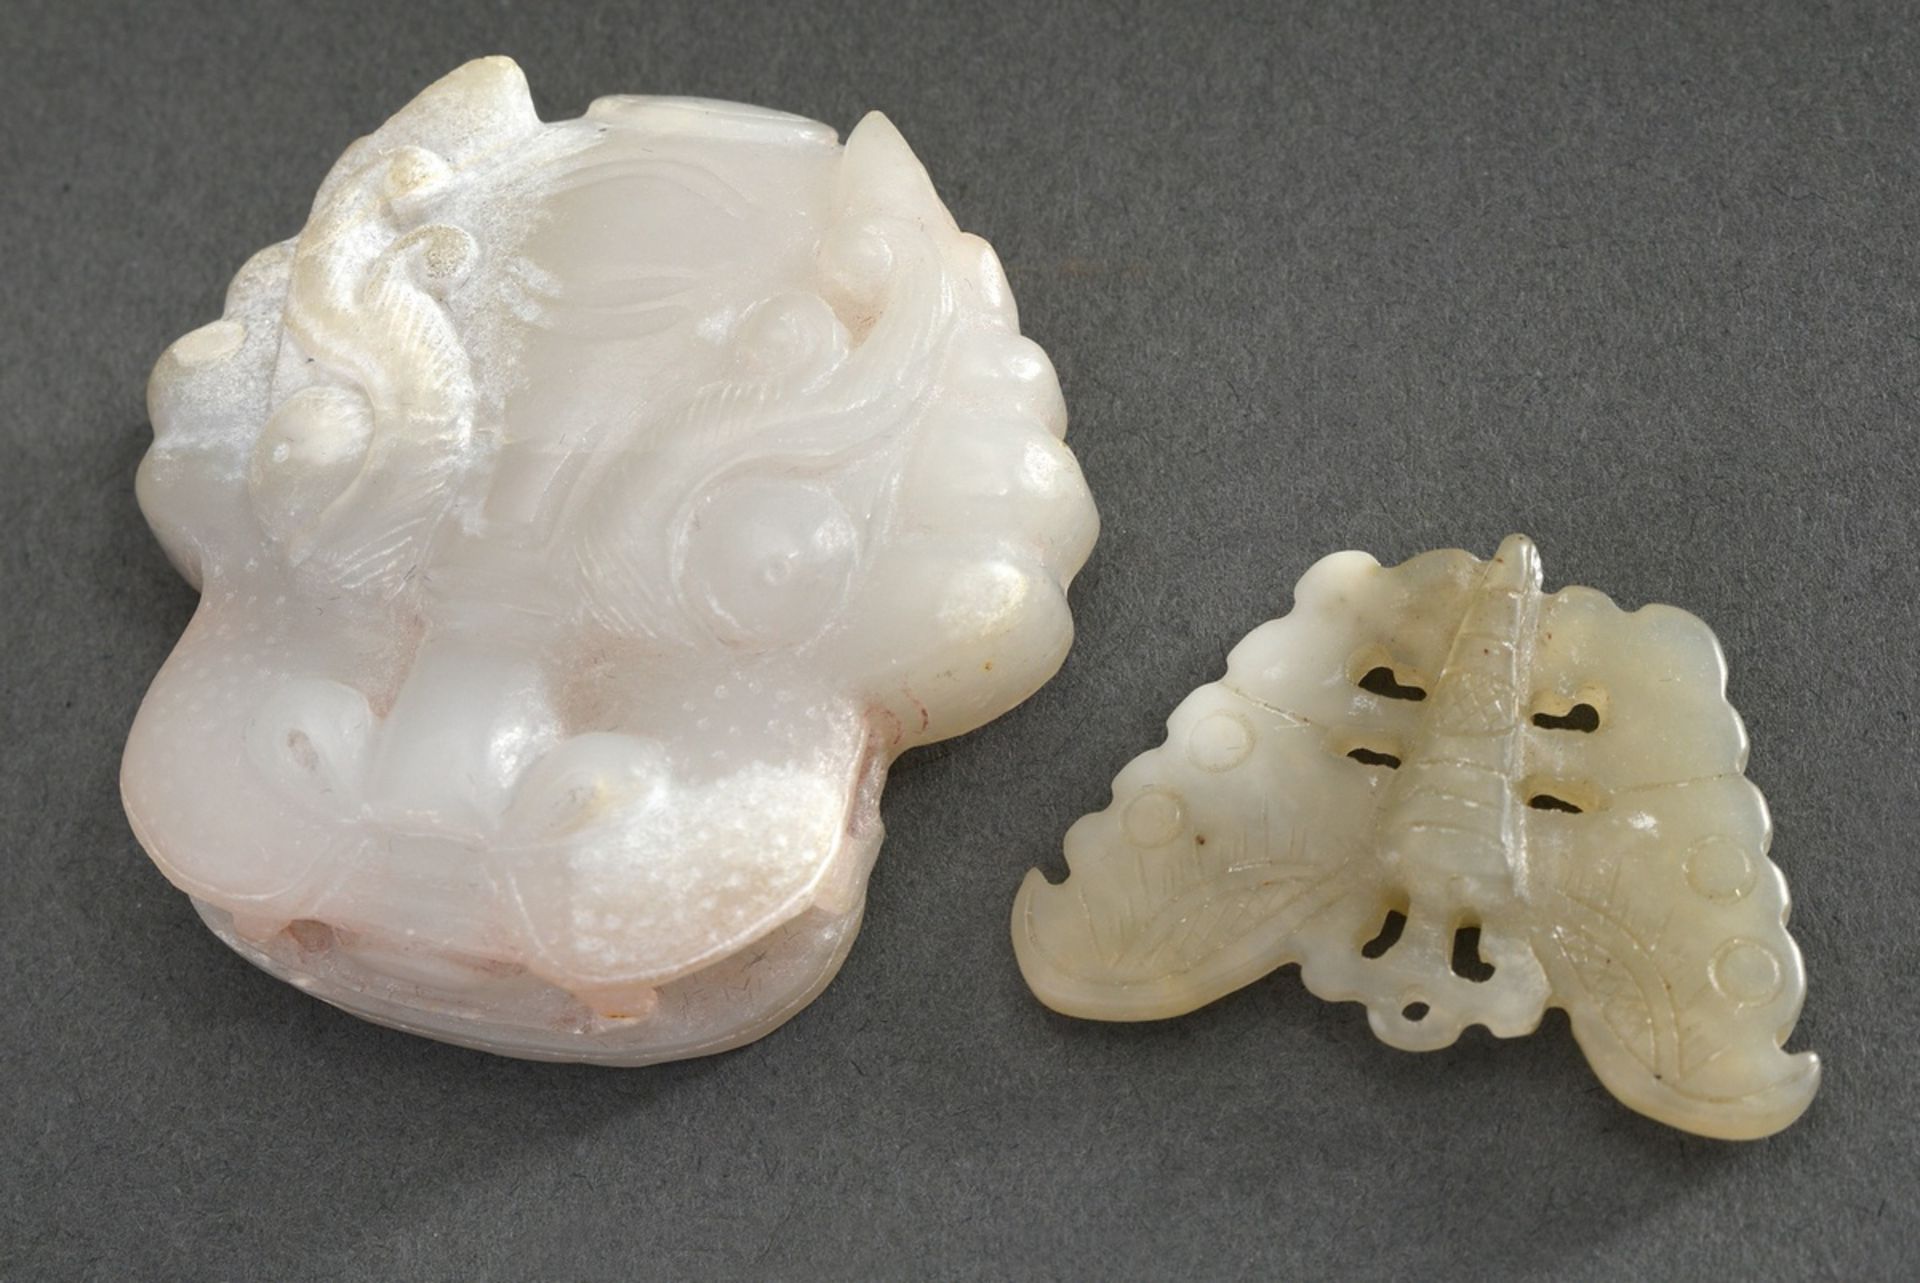 2 Miscellaneous Jade Objects: Belt buckle of white calcined jade "monster head" in Han style and pe